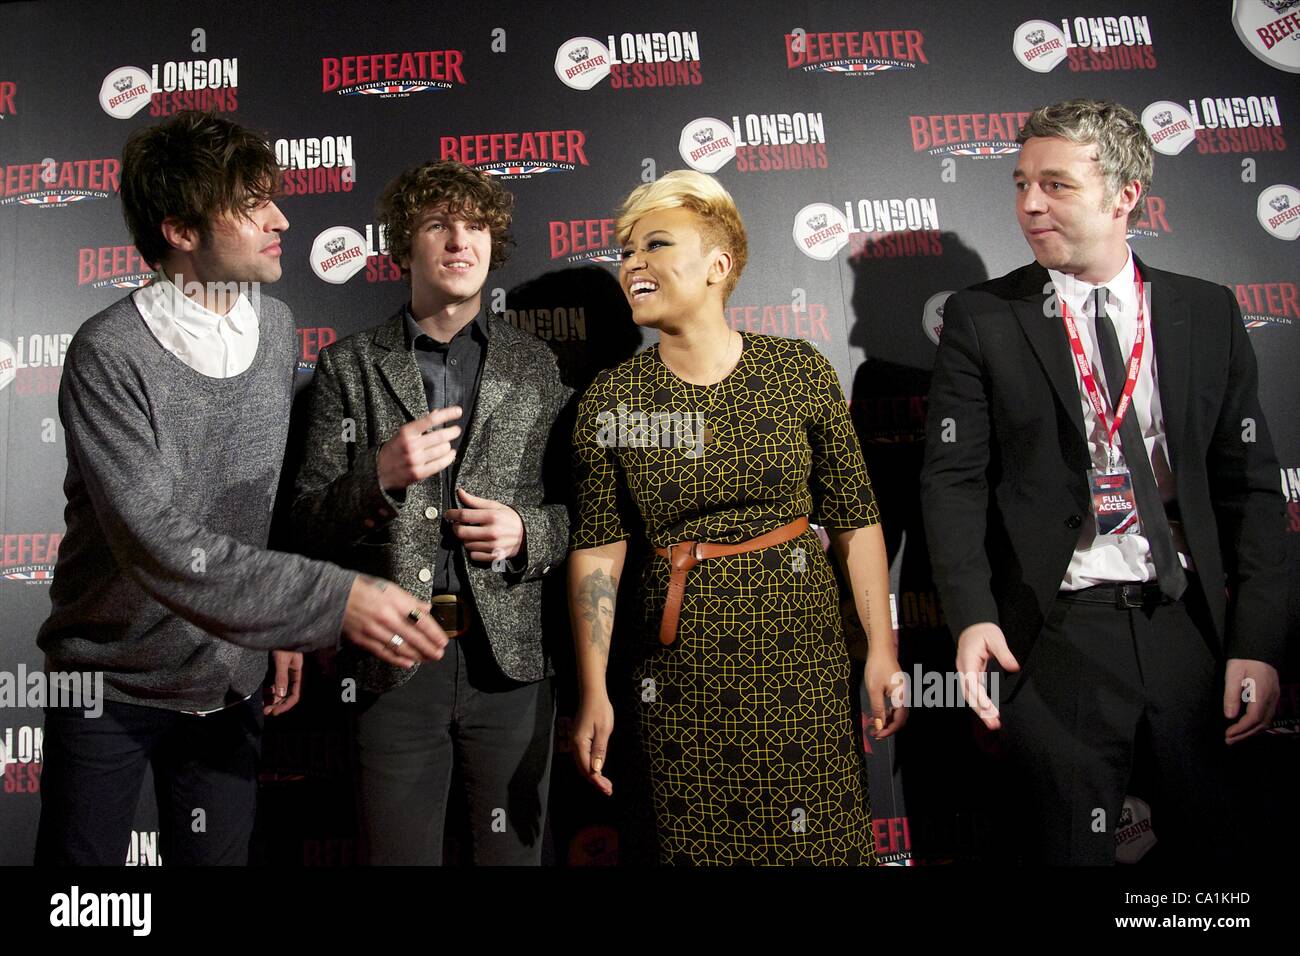 March 20, 2012 - Madrid, Spain - Luke Pritchard, Hugh Harris, Peter Denton, Paul Garred and George Manckuso from The Kooks, Emeli Sande and  Baxter Dury attend a photocall during Beefeater London Sessions Festival at tipical spanish t'ablao' El Corral de la Pacheca in Madrid (Credit Image: © Jack Ab Stock Photo